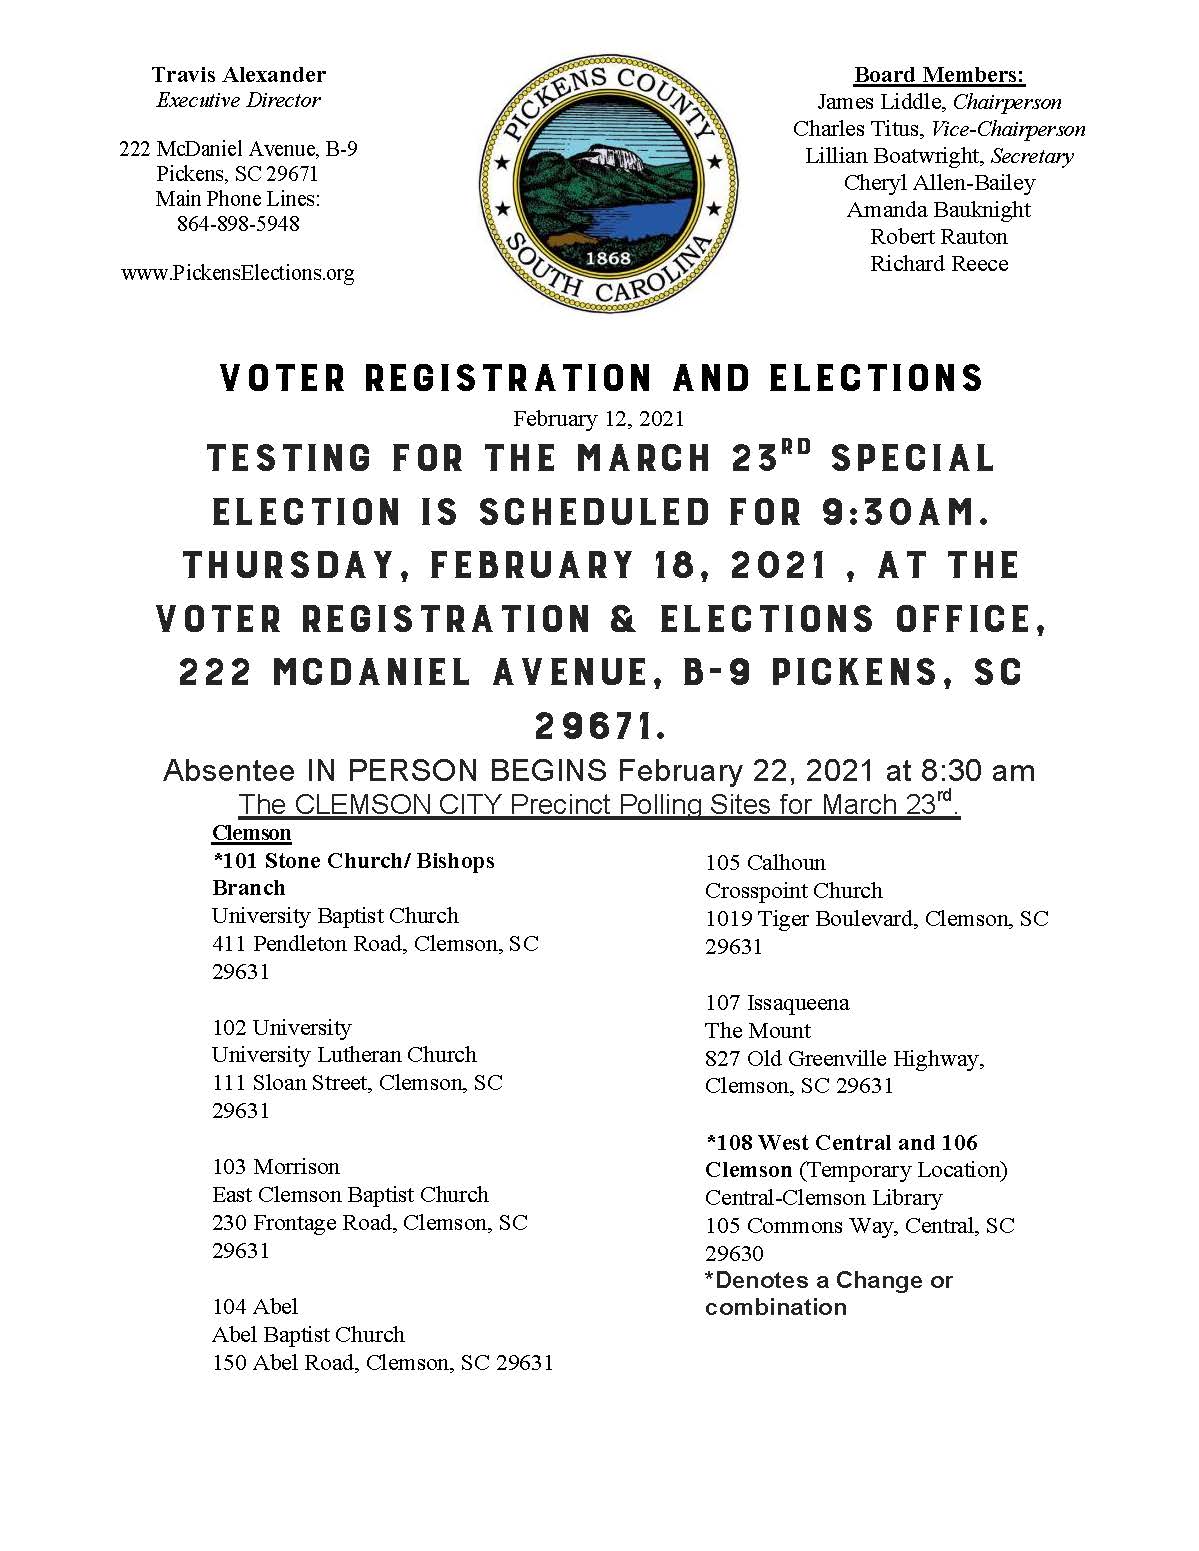 March 23rd Special Election Information